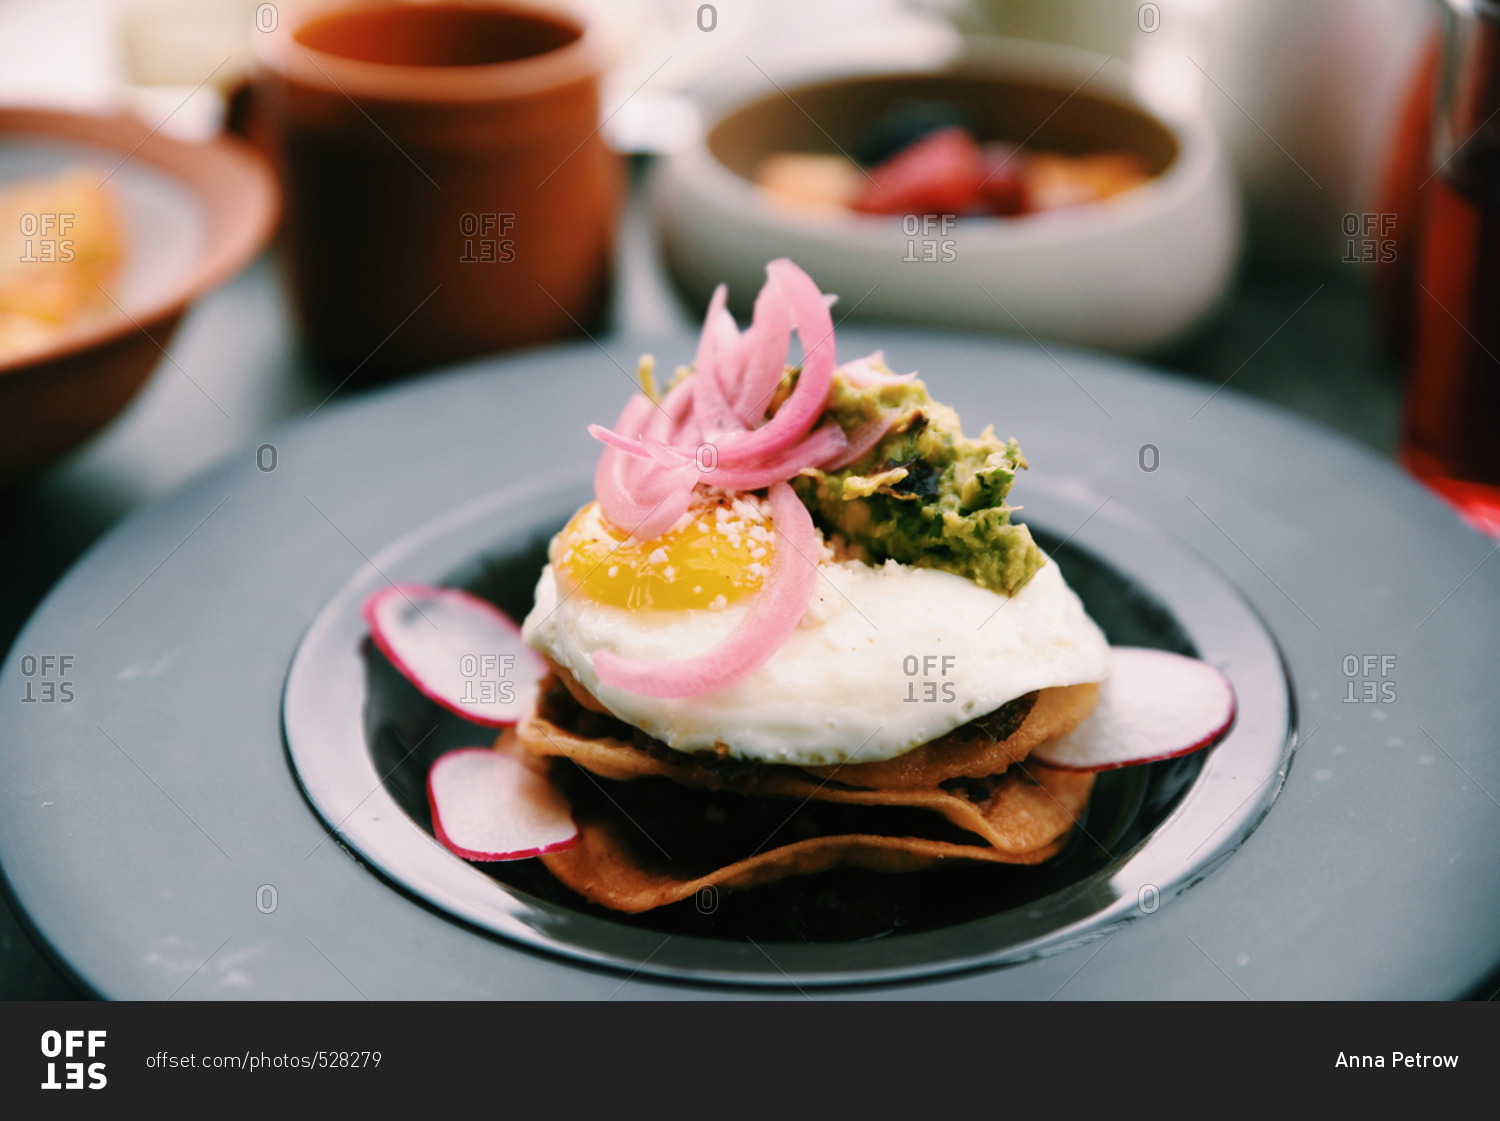 Fried tortillas topped with fried egg, guacamole and pickled onions